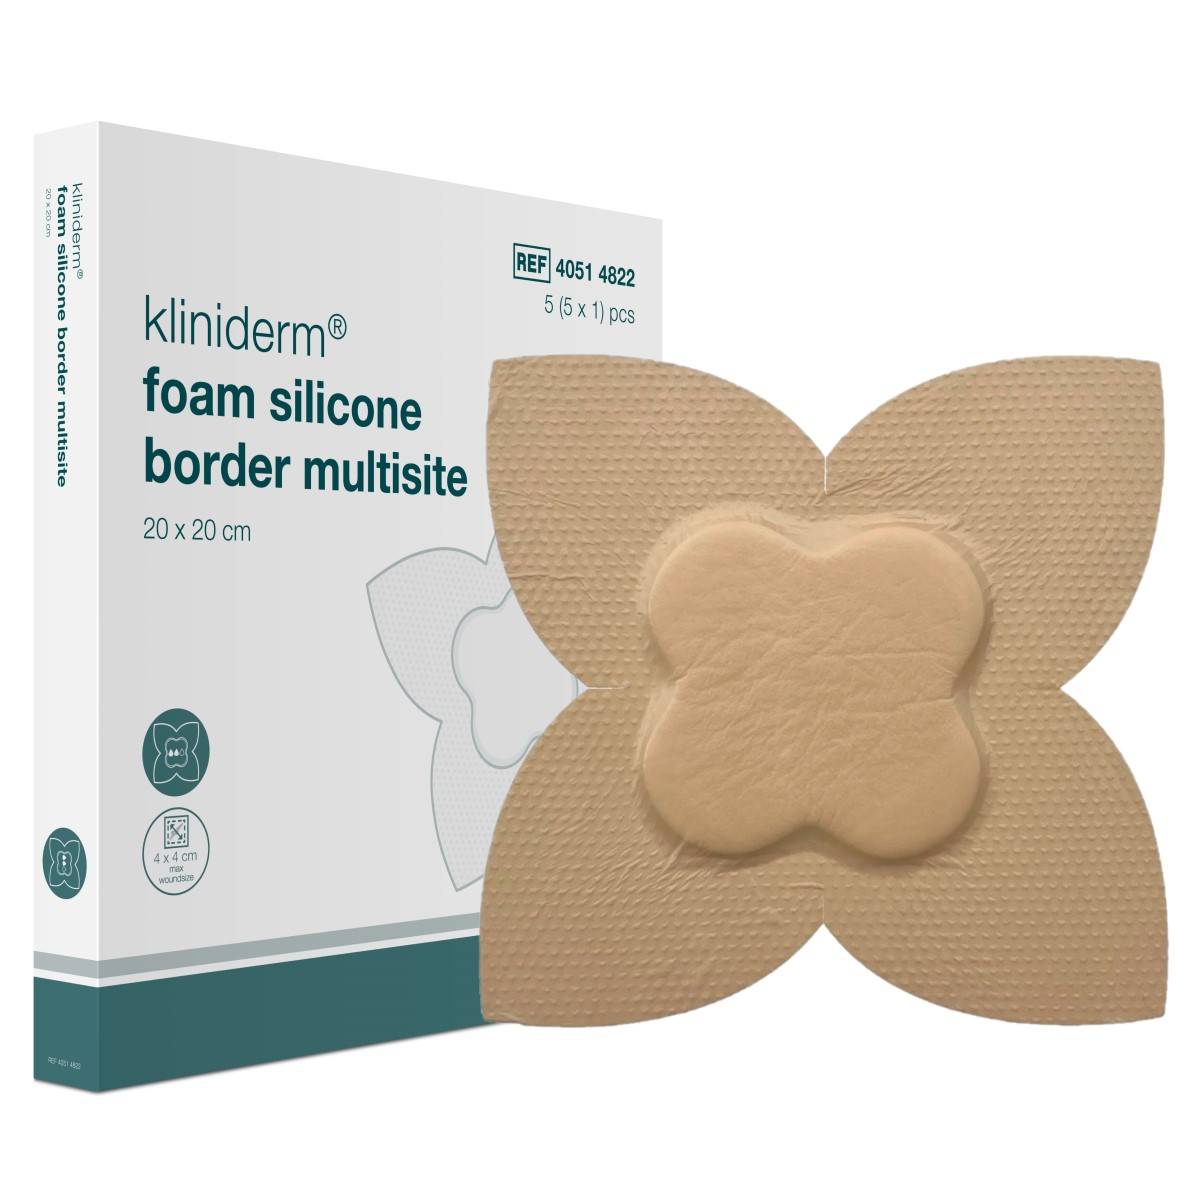 Kliniderm Foam Silicone Border Multisite with packaging